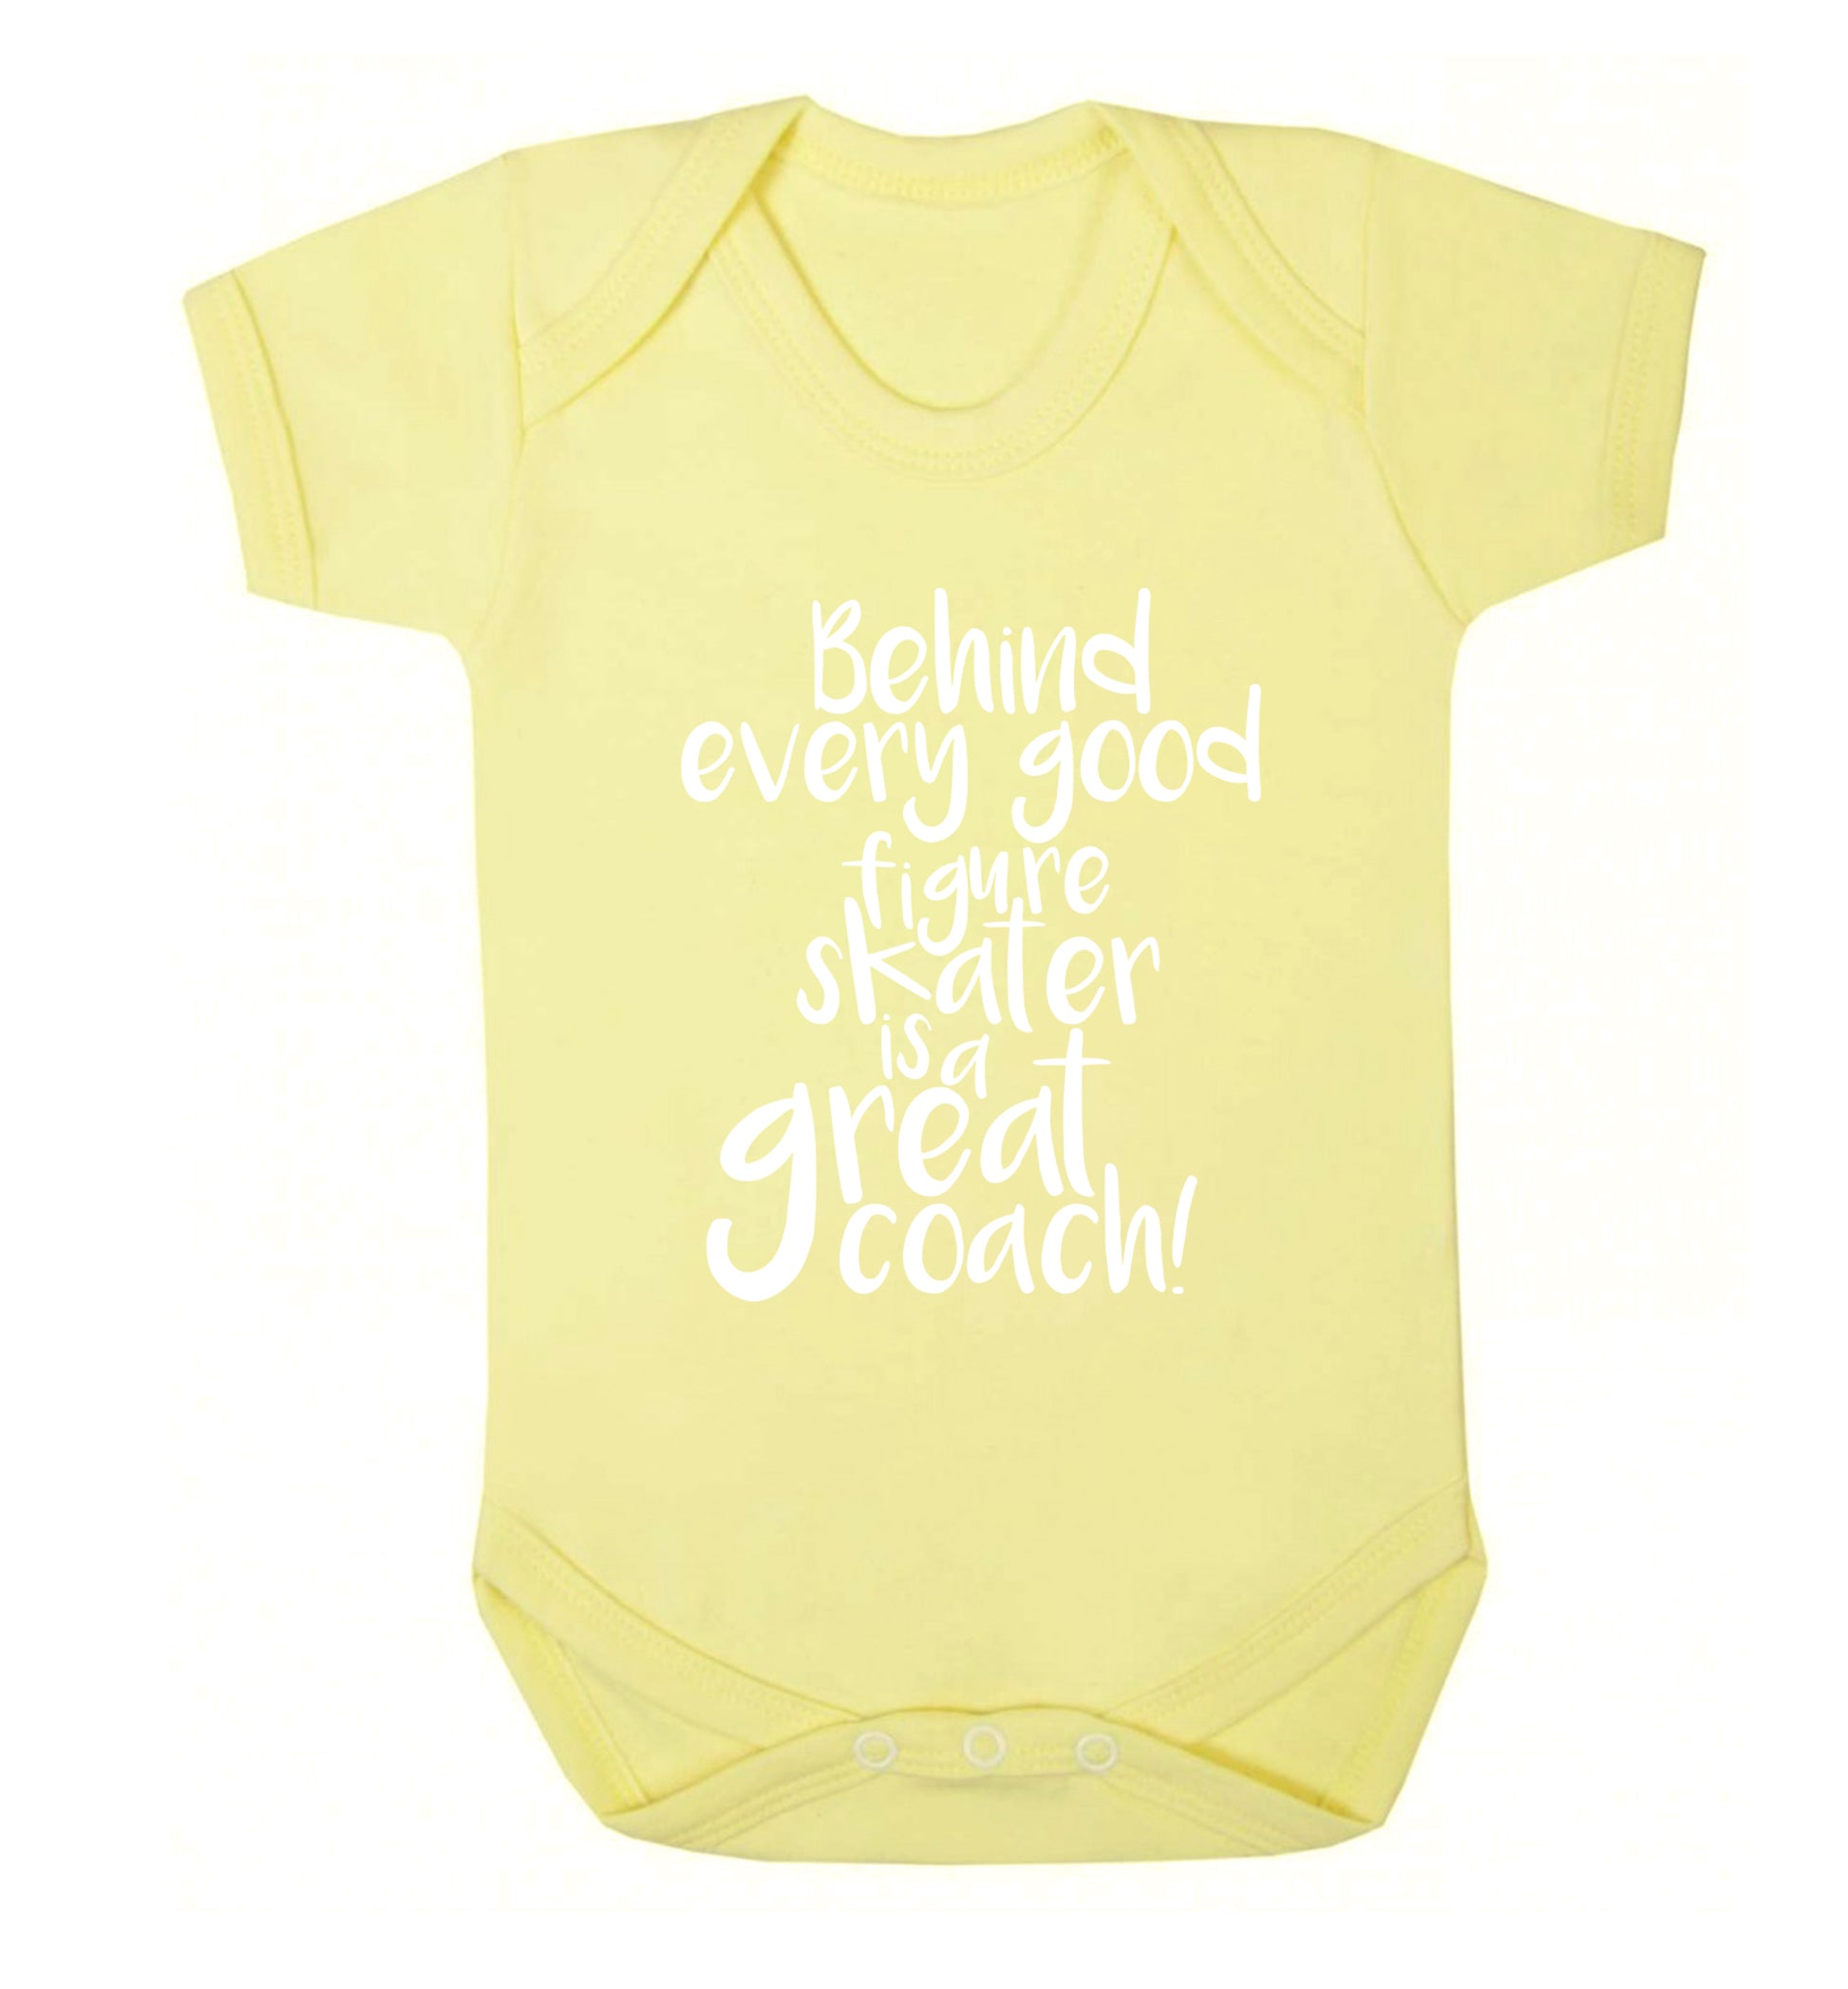 Behind every good figure skater is a great coach Baby Vest pale yellow 18-24 months